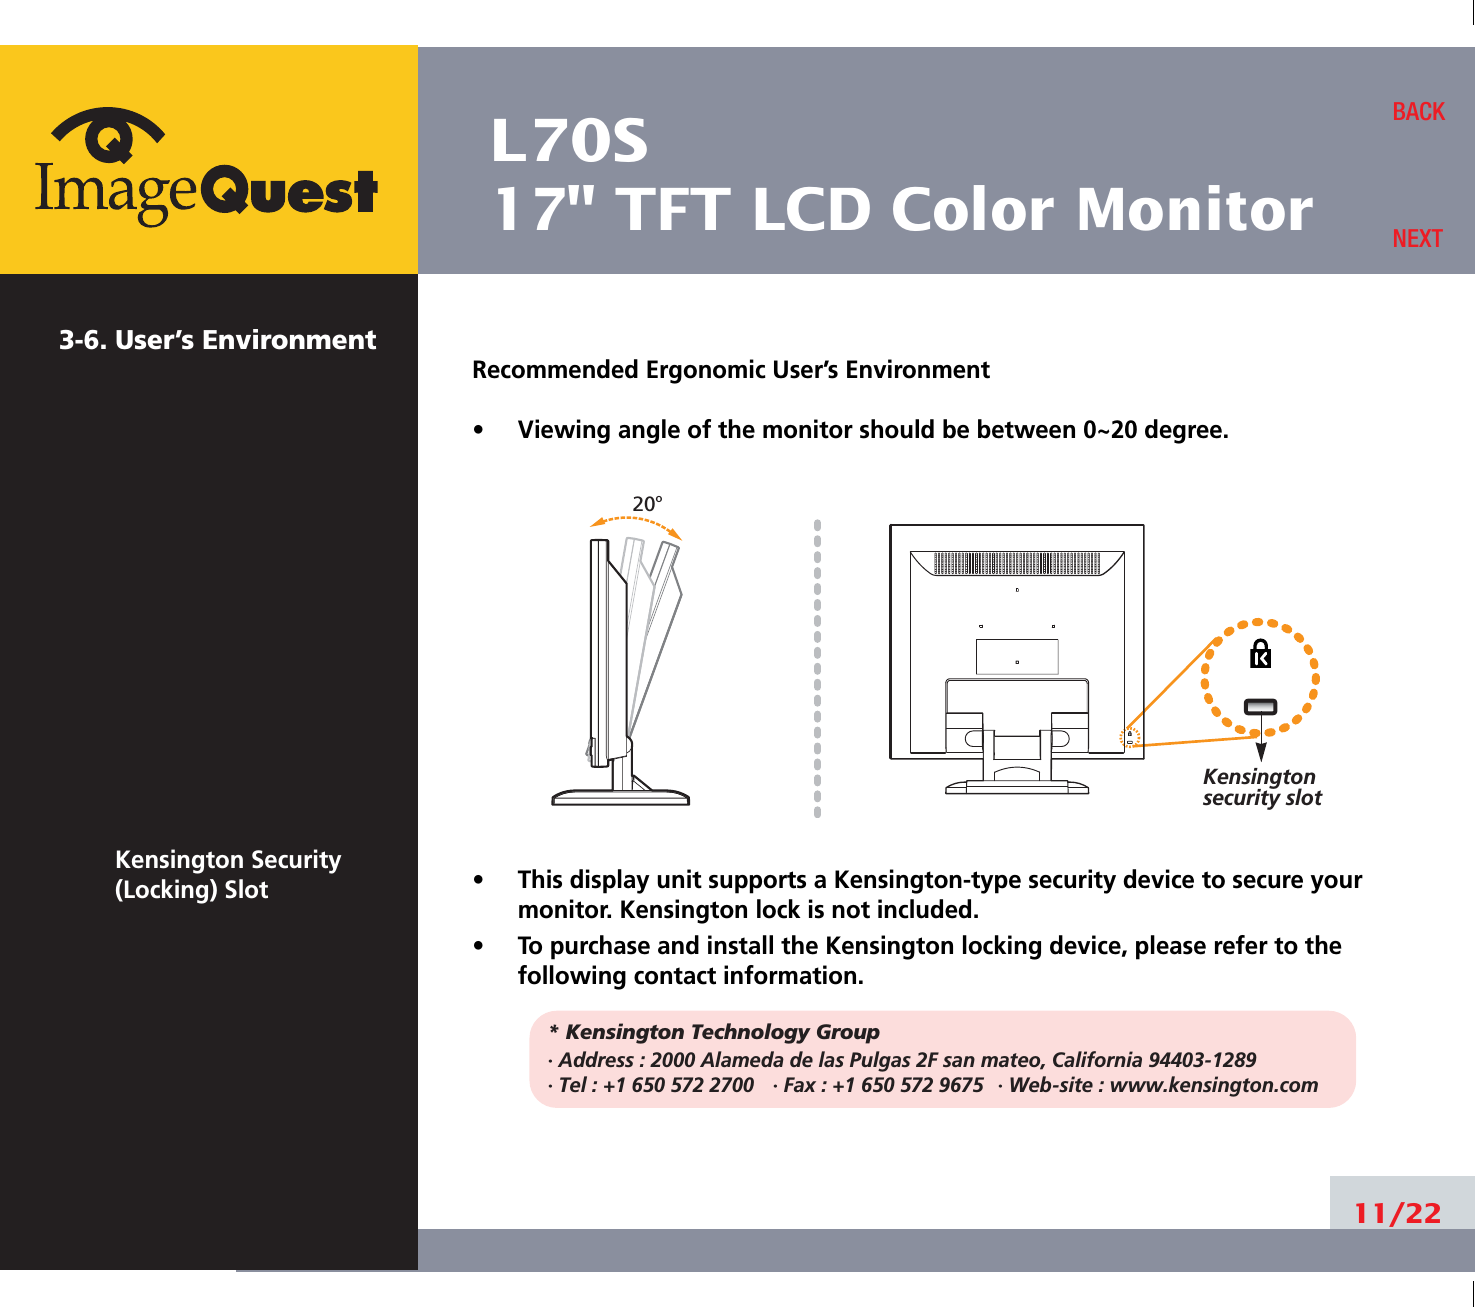 L70S17&quot; TFT LCD Color Monitor3-6. User’s EnvironmentKensington Security(Locking) SlotRecommended Ergonomic User’s Environment•     Viewing angle of the monitor should be between 0~20 degree.•     This display unit supports a Kensington-type security device to secure yourmonitor. Kensington lock is not included.•     To purchase and install the Kensington locking device, please refer to thefollowing contact information.* Kensington Technology Group· Address : 2000 Alameda de las Pulgas 2F san mateo, California 94403-1289· Tel : +1 650 572 2700 · Fax : +1 650 572 9675 · Web-site : www.kensington.com11/22BACKNEXT20oKensington security slot